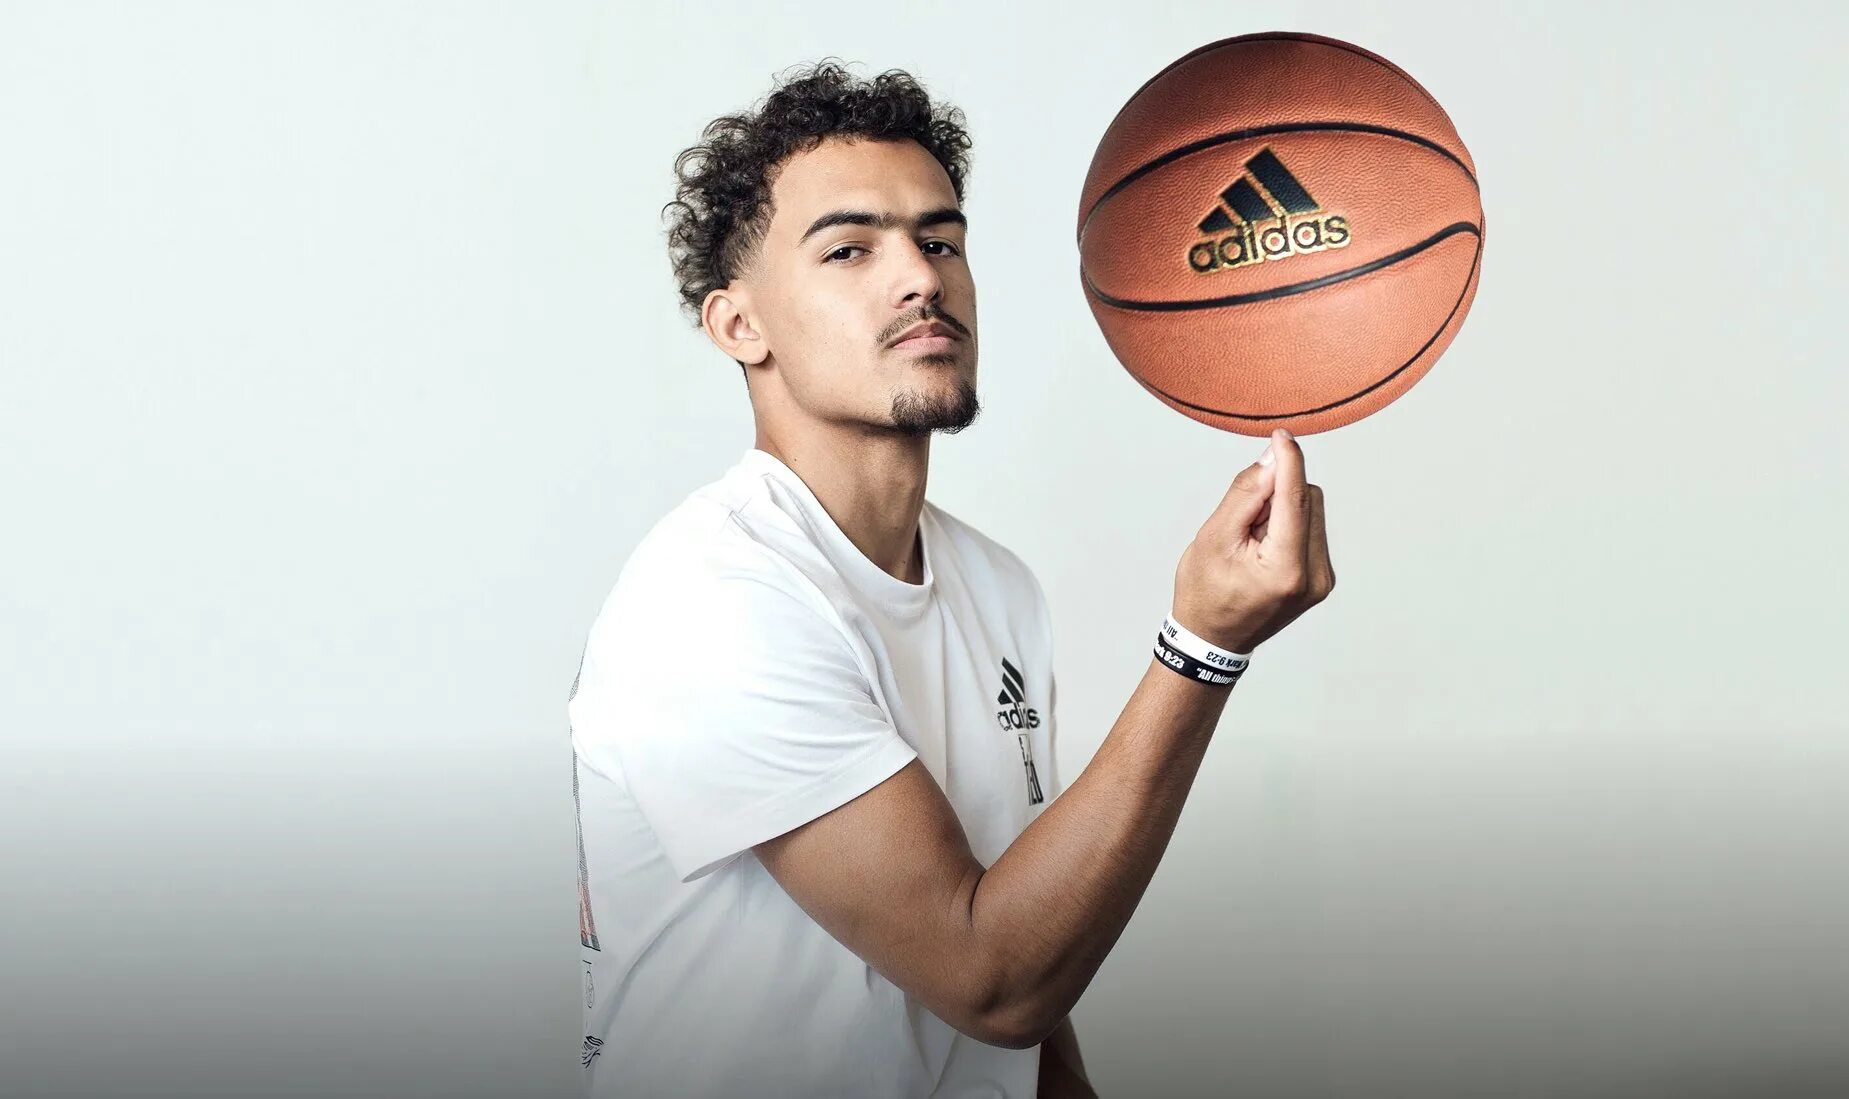 Trae young 1 кроссовки. Adidas trae young 1. Адидас trae young 1 НБА. Adidas trae young